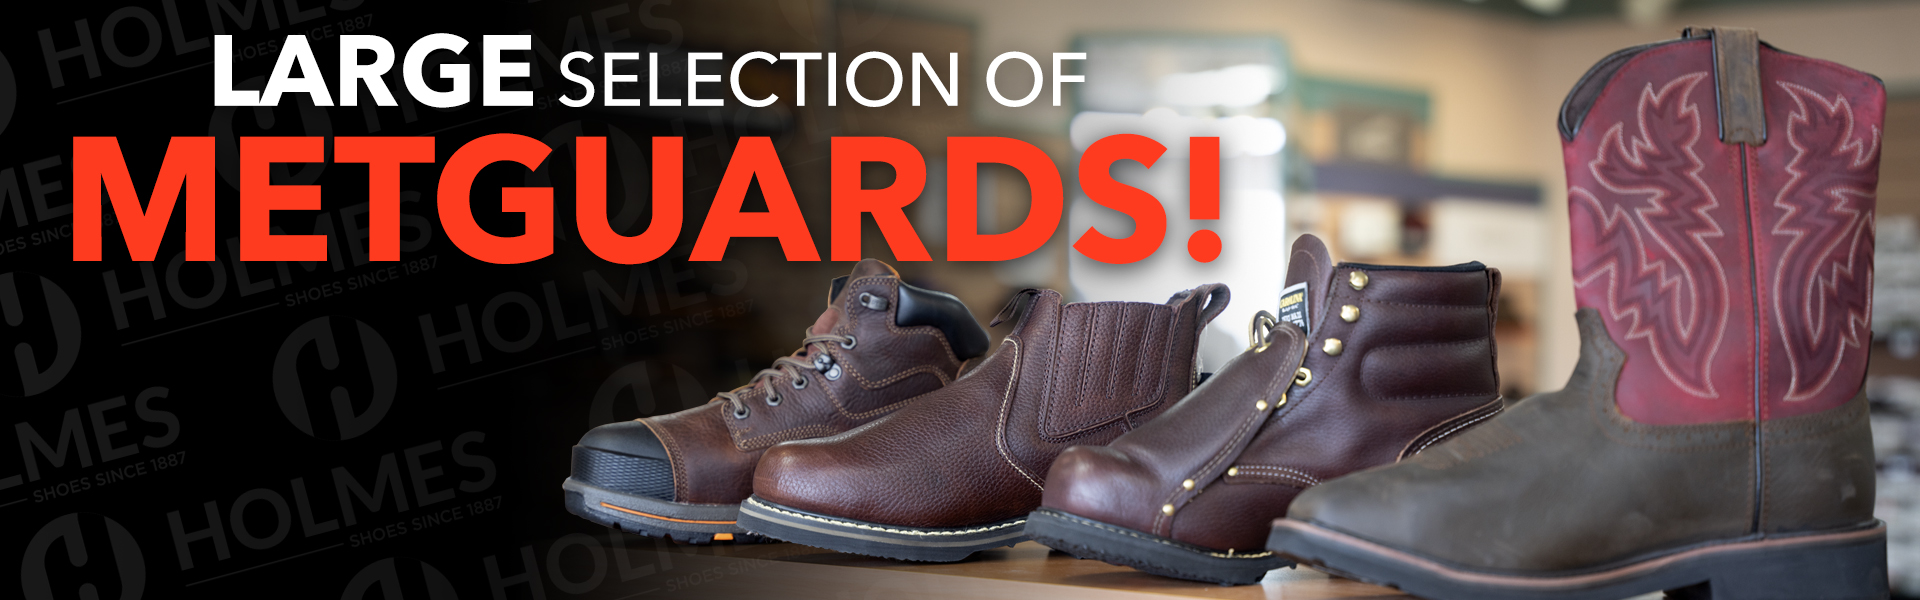 Ready to work? We have the work boots & safety shoes you need.